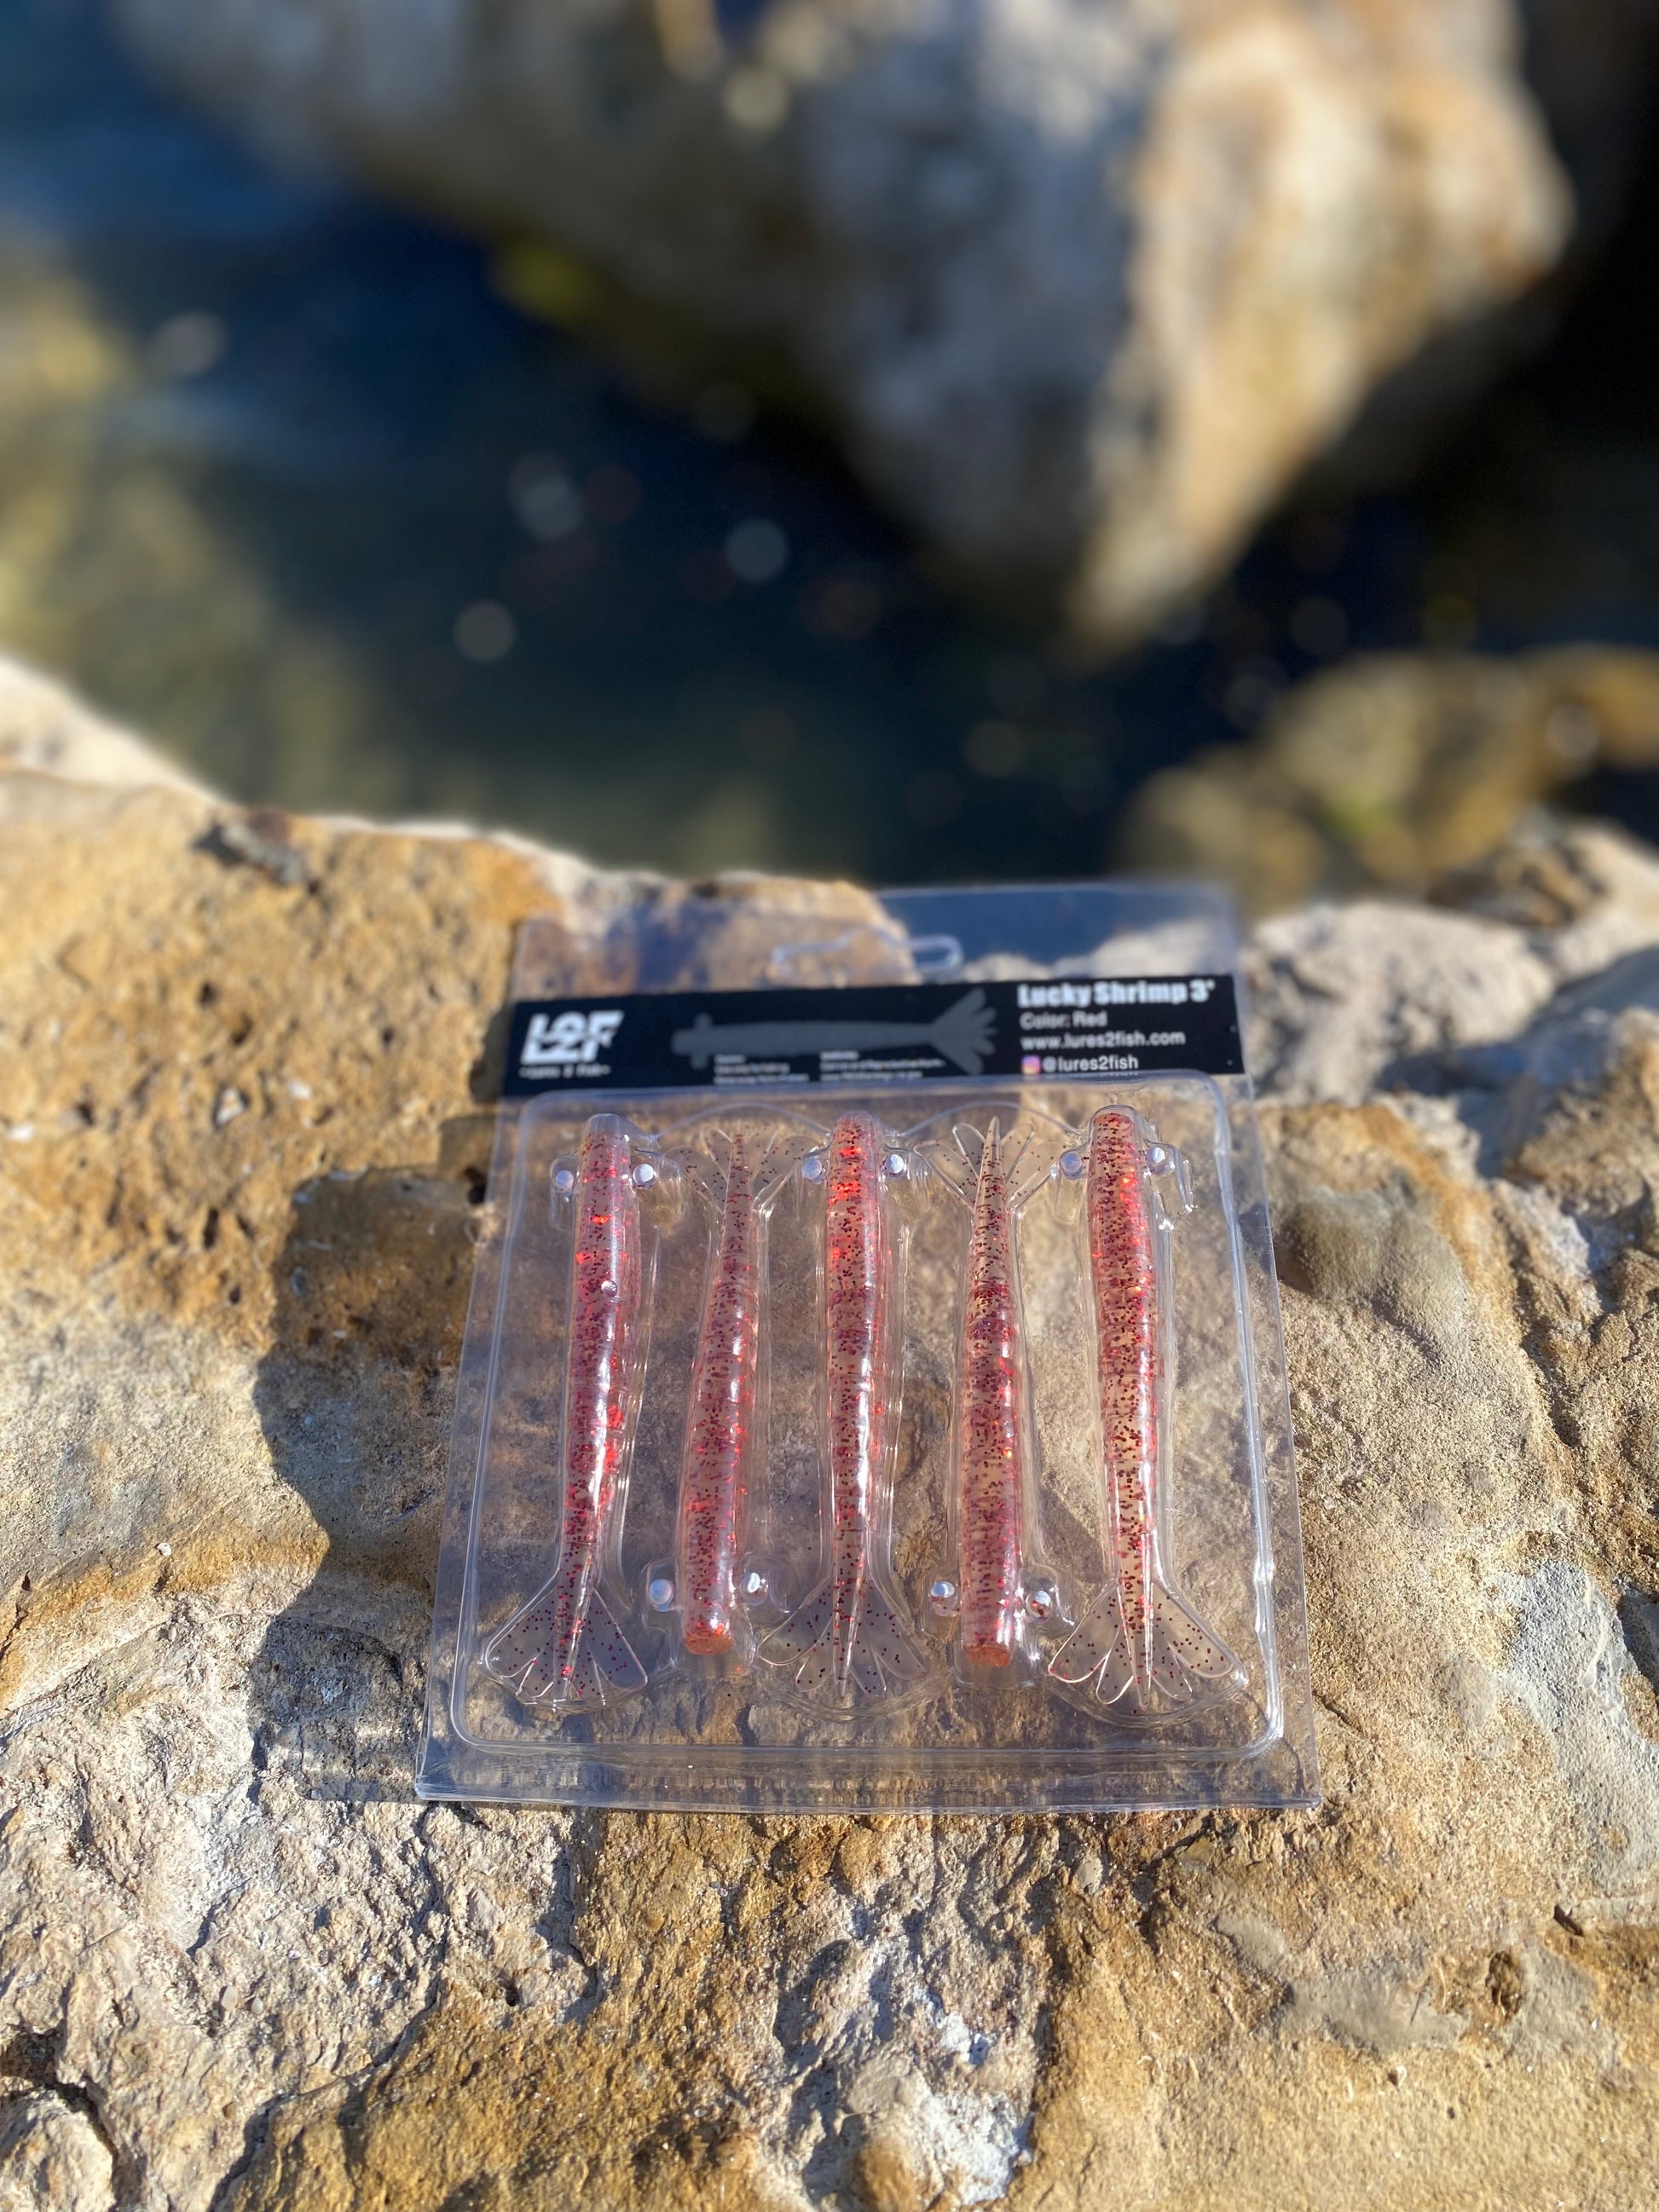 L2F Lucky Shrimp 3' – Lures 2 Fish